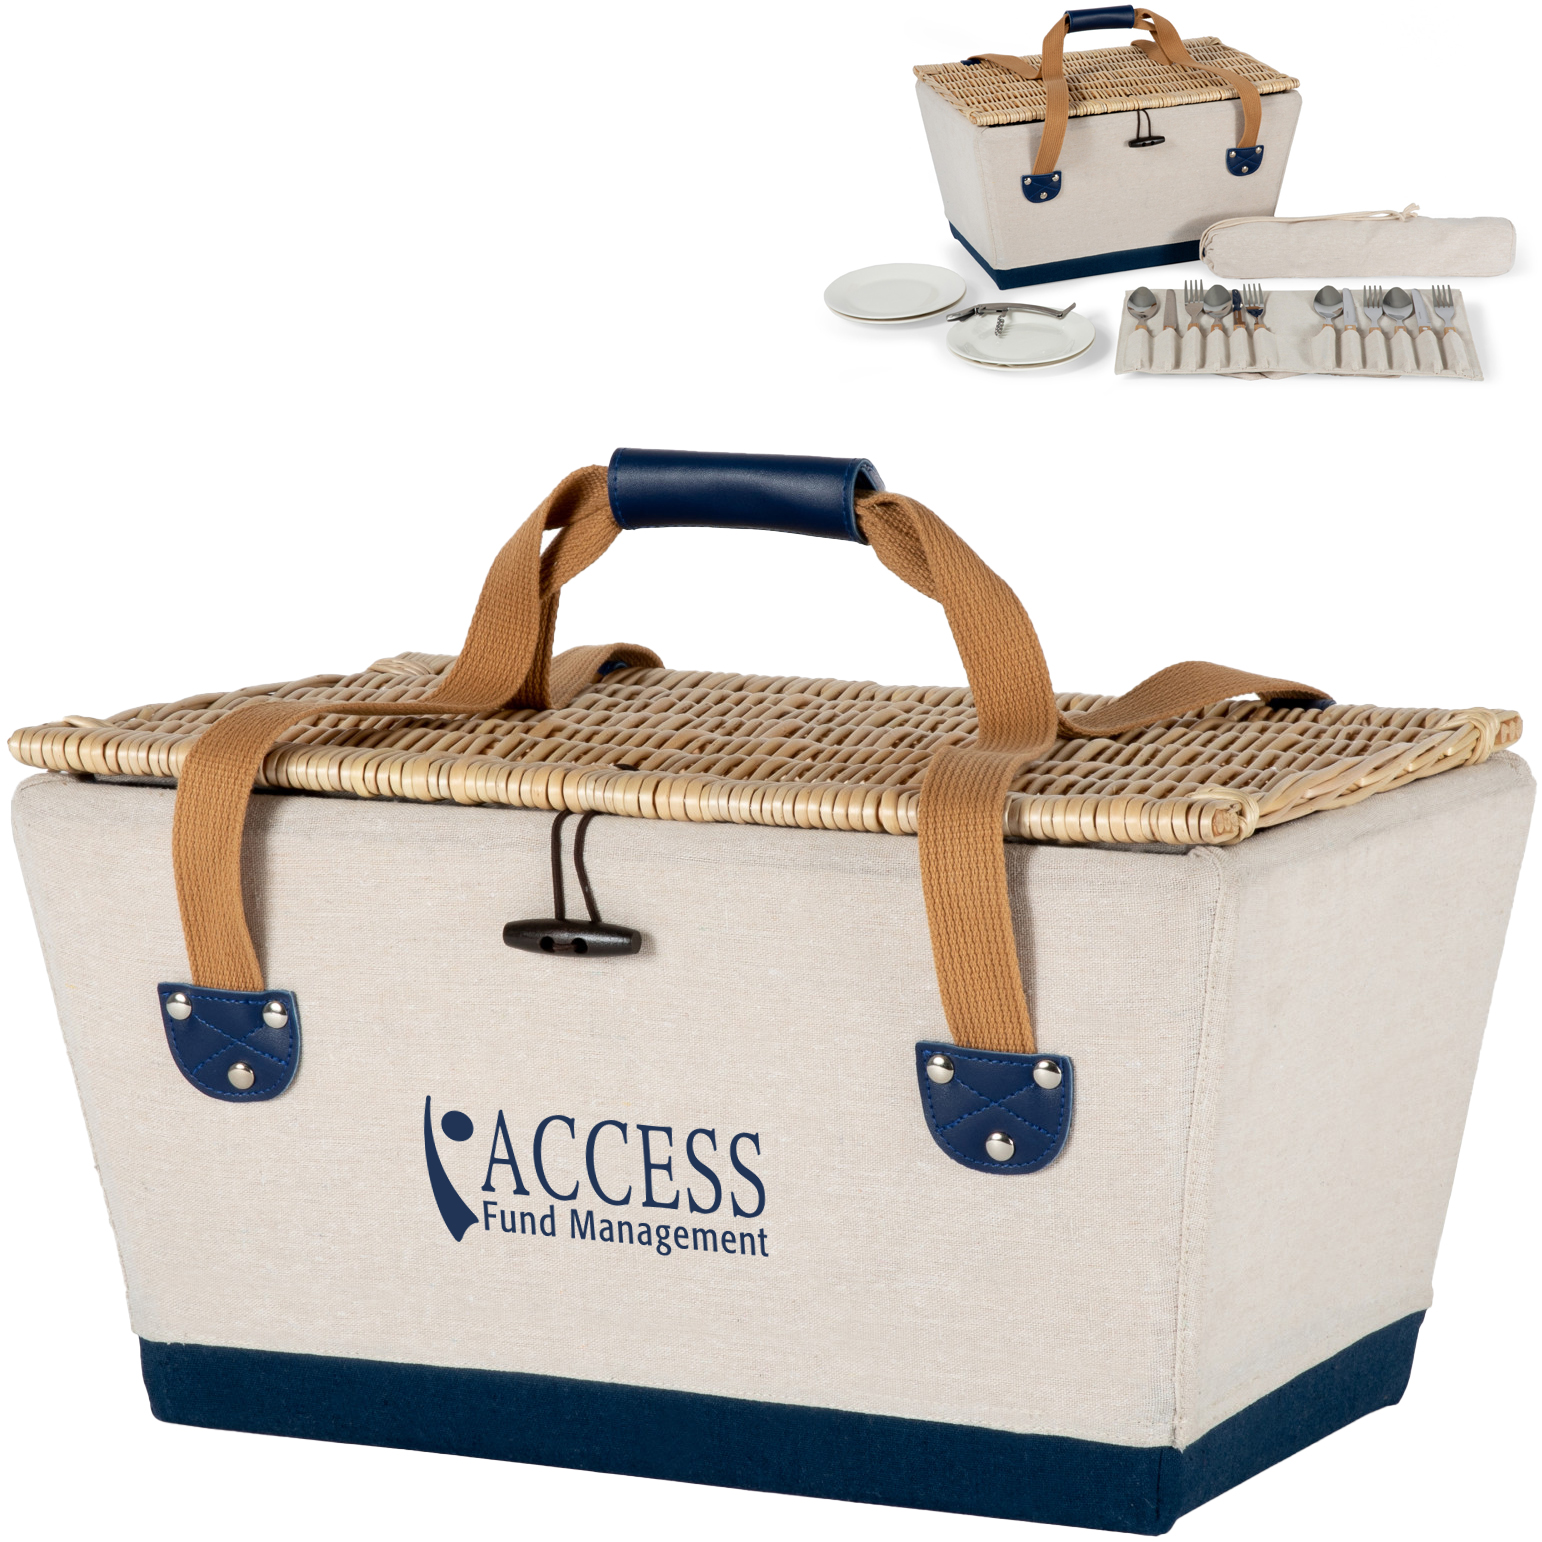 Picnic-To-Go Gift Set - Personalization Available